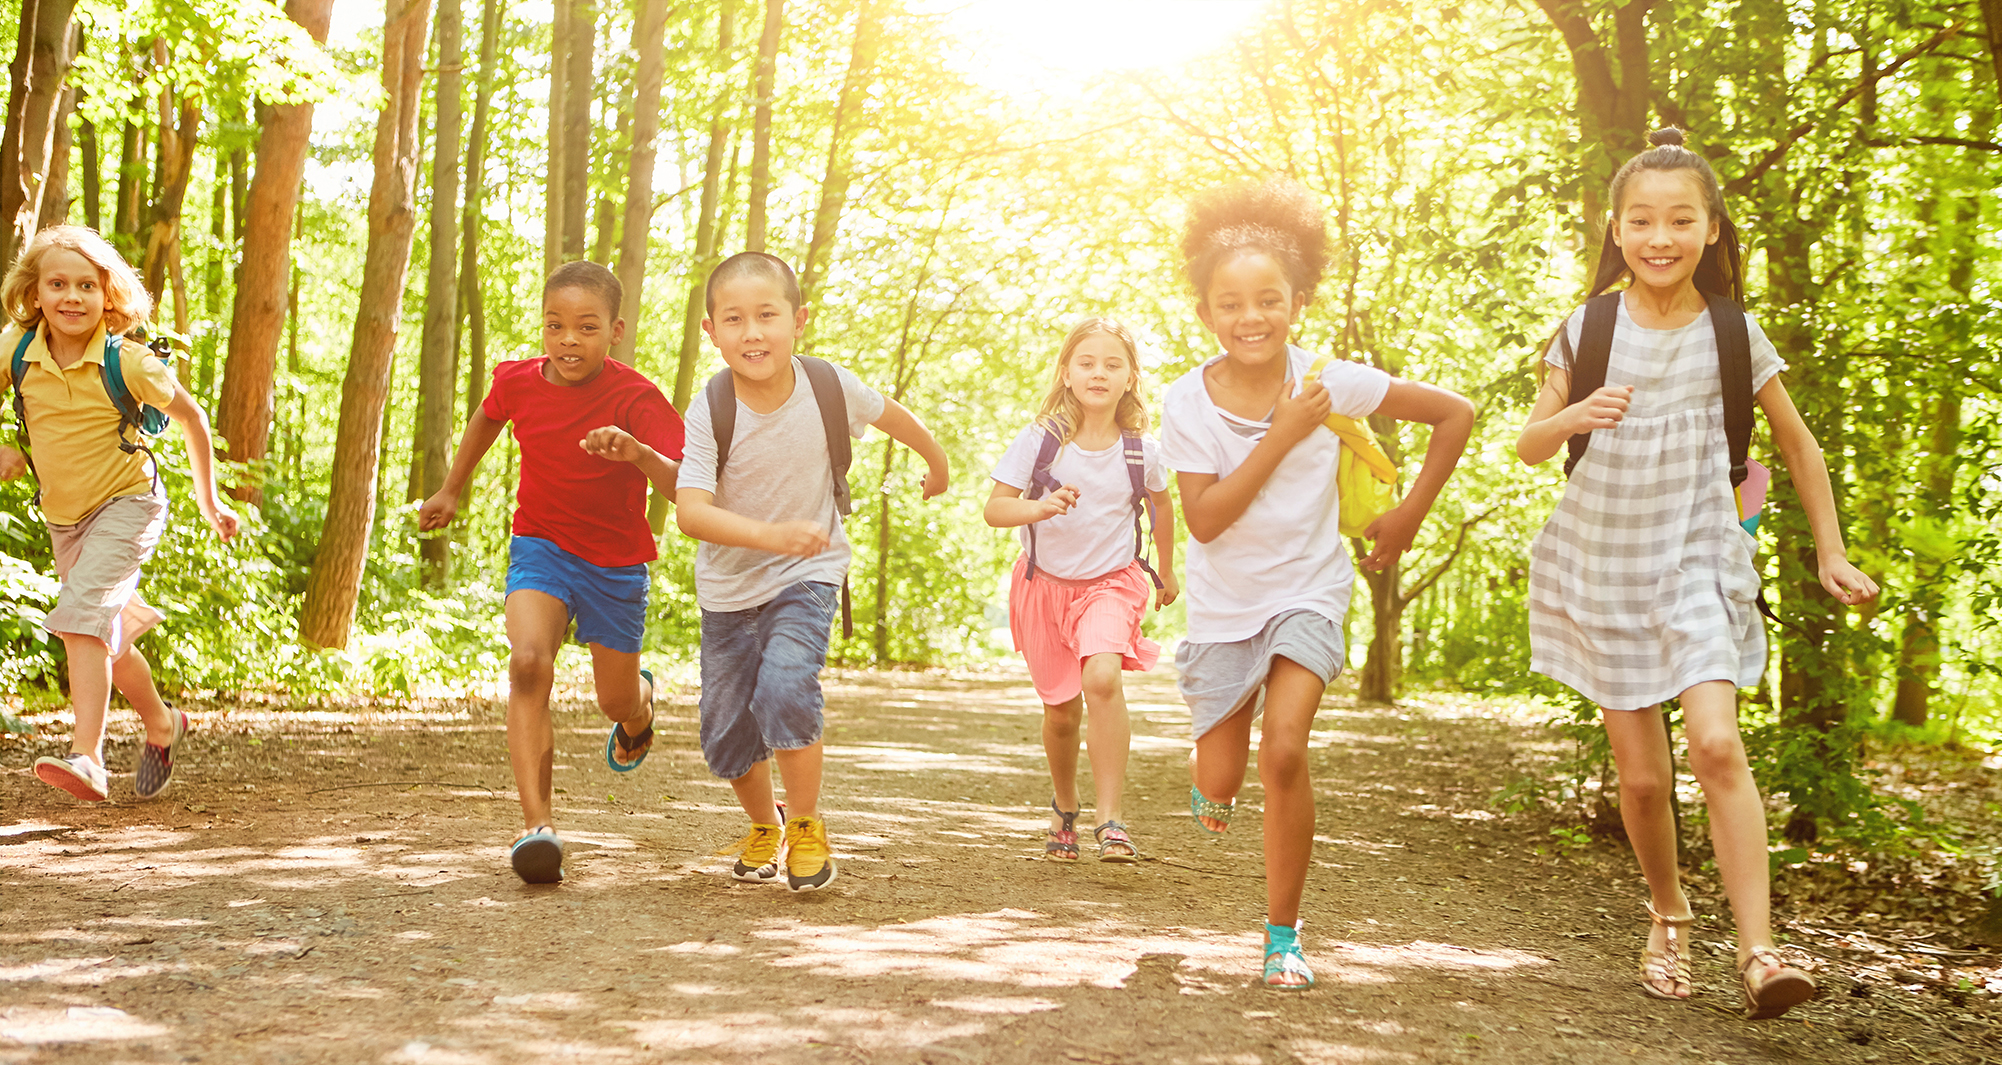 Children running down a trail through the forest. They are smiling and the sun is shining behind them.